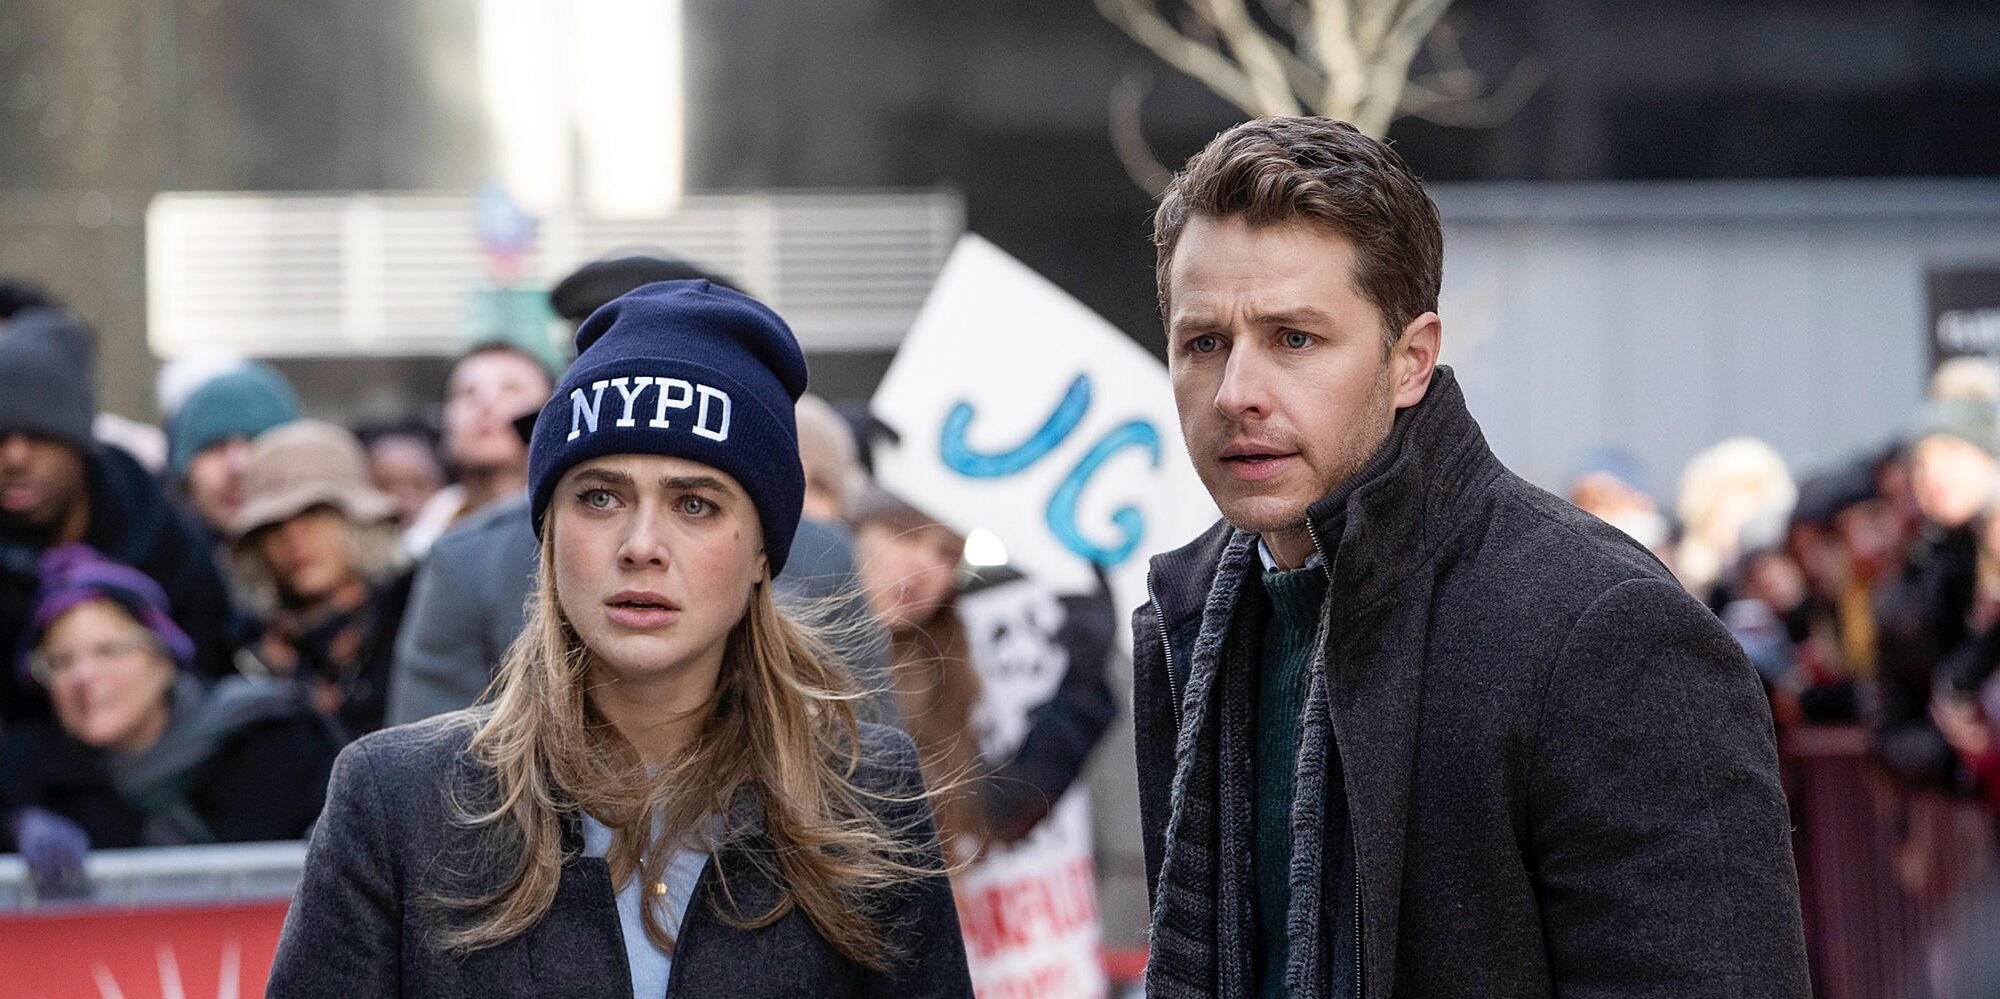 Manifest creator wants to give fans the ending they deserve despite show’s cancellation